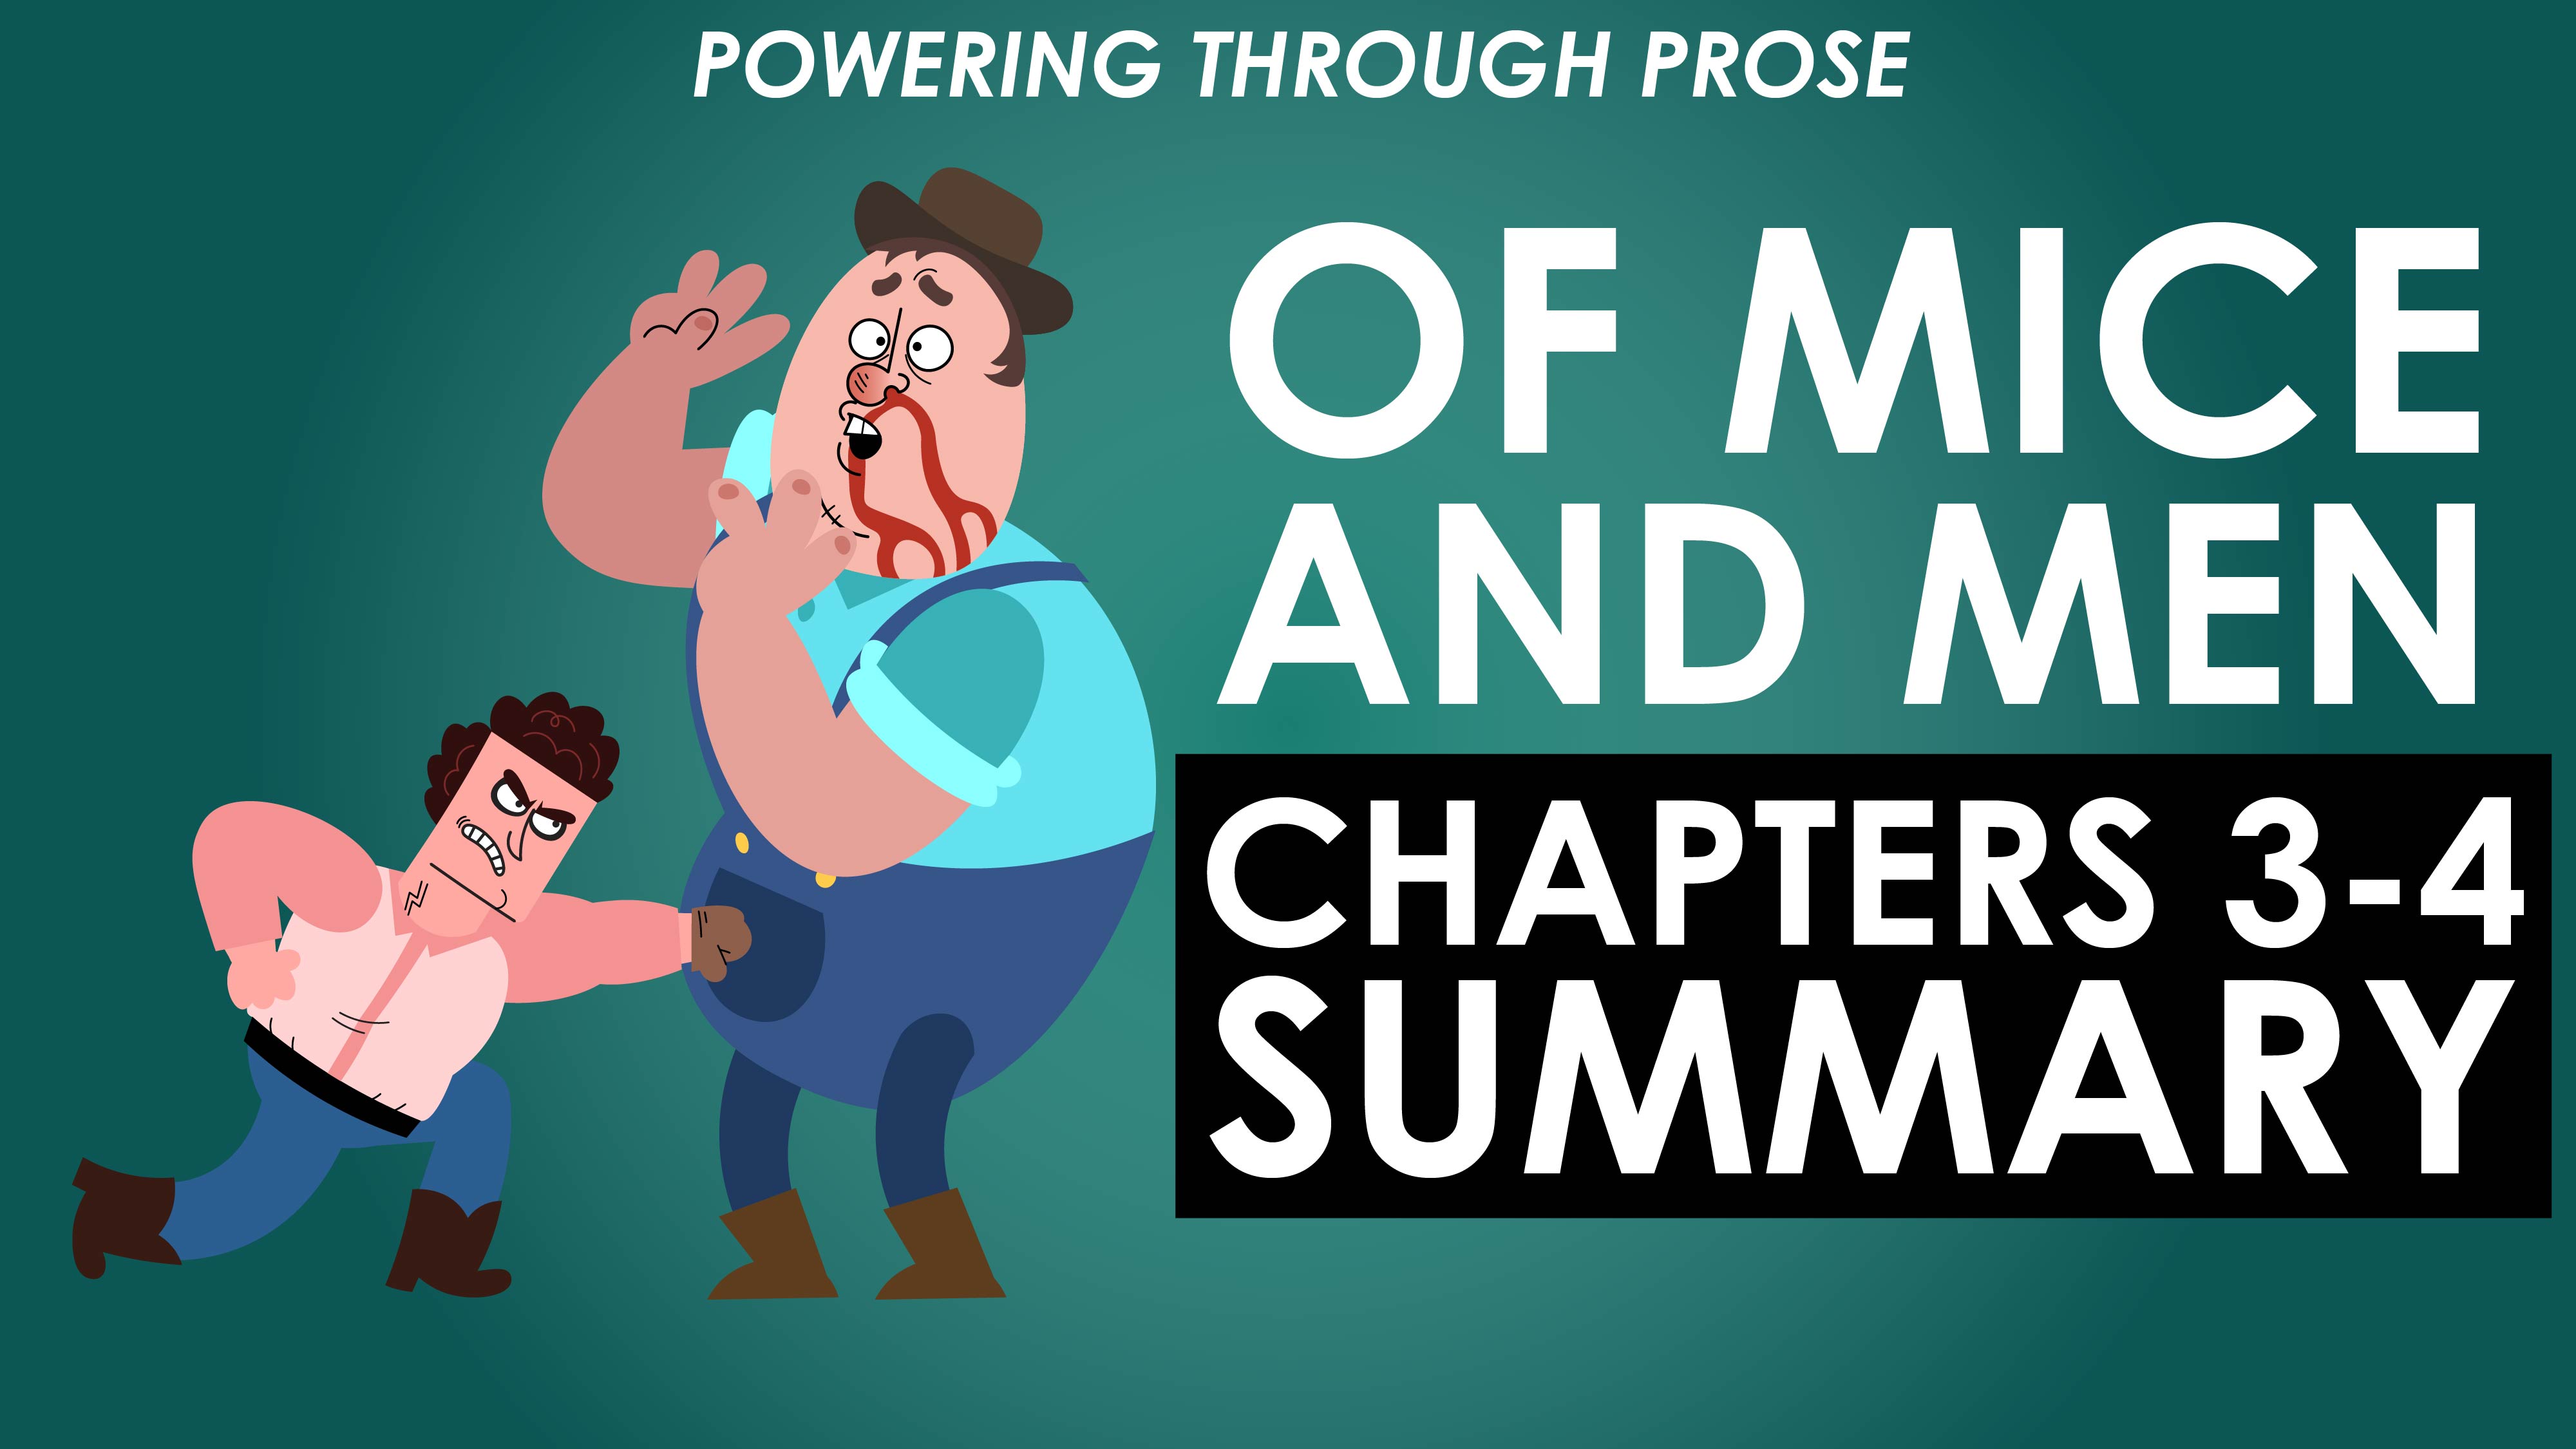 Of Mice and Men - John Steinbeck - Chapters 3-4 - Powering Through Prose Series	